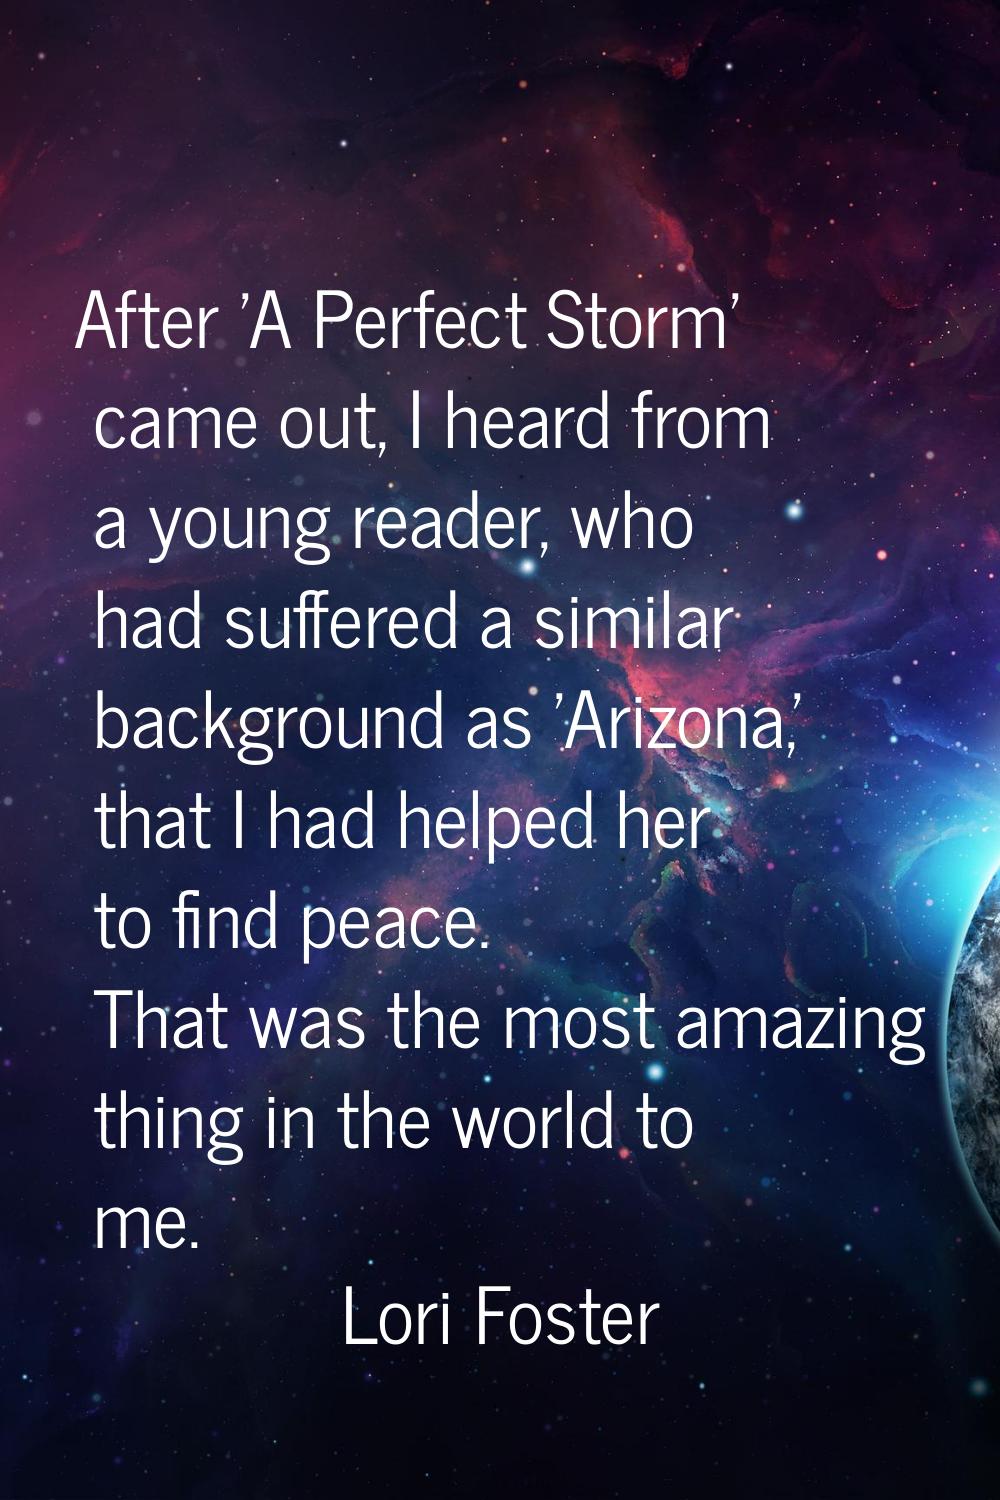 After 'A Perfect Storm' came out, I heard from a young reader, who had suffered a similar backgroun